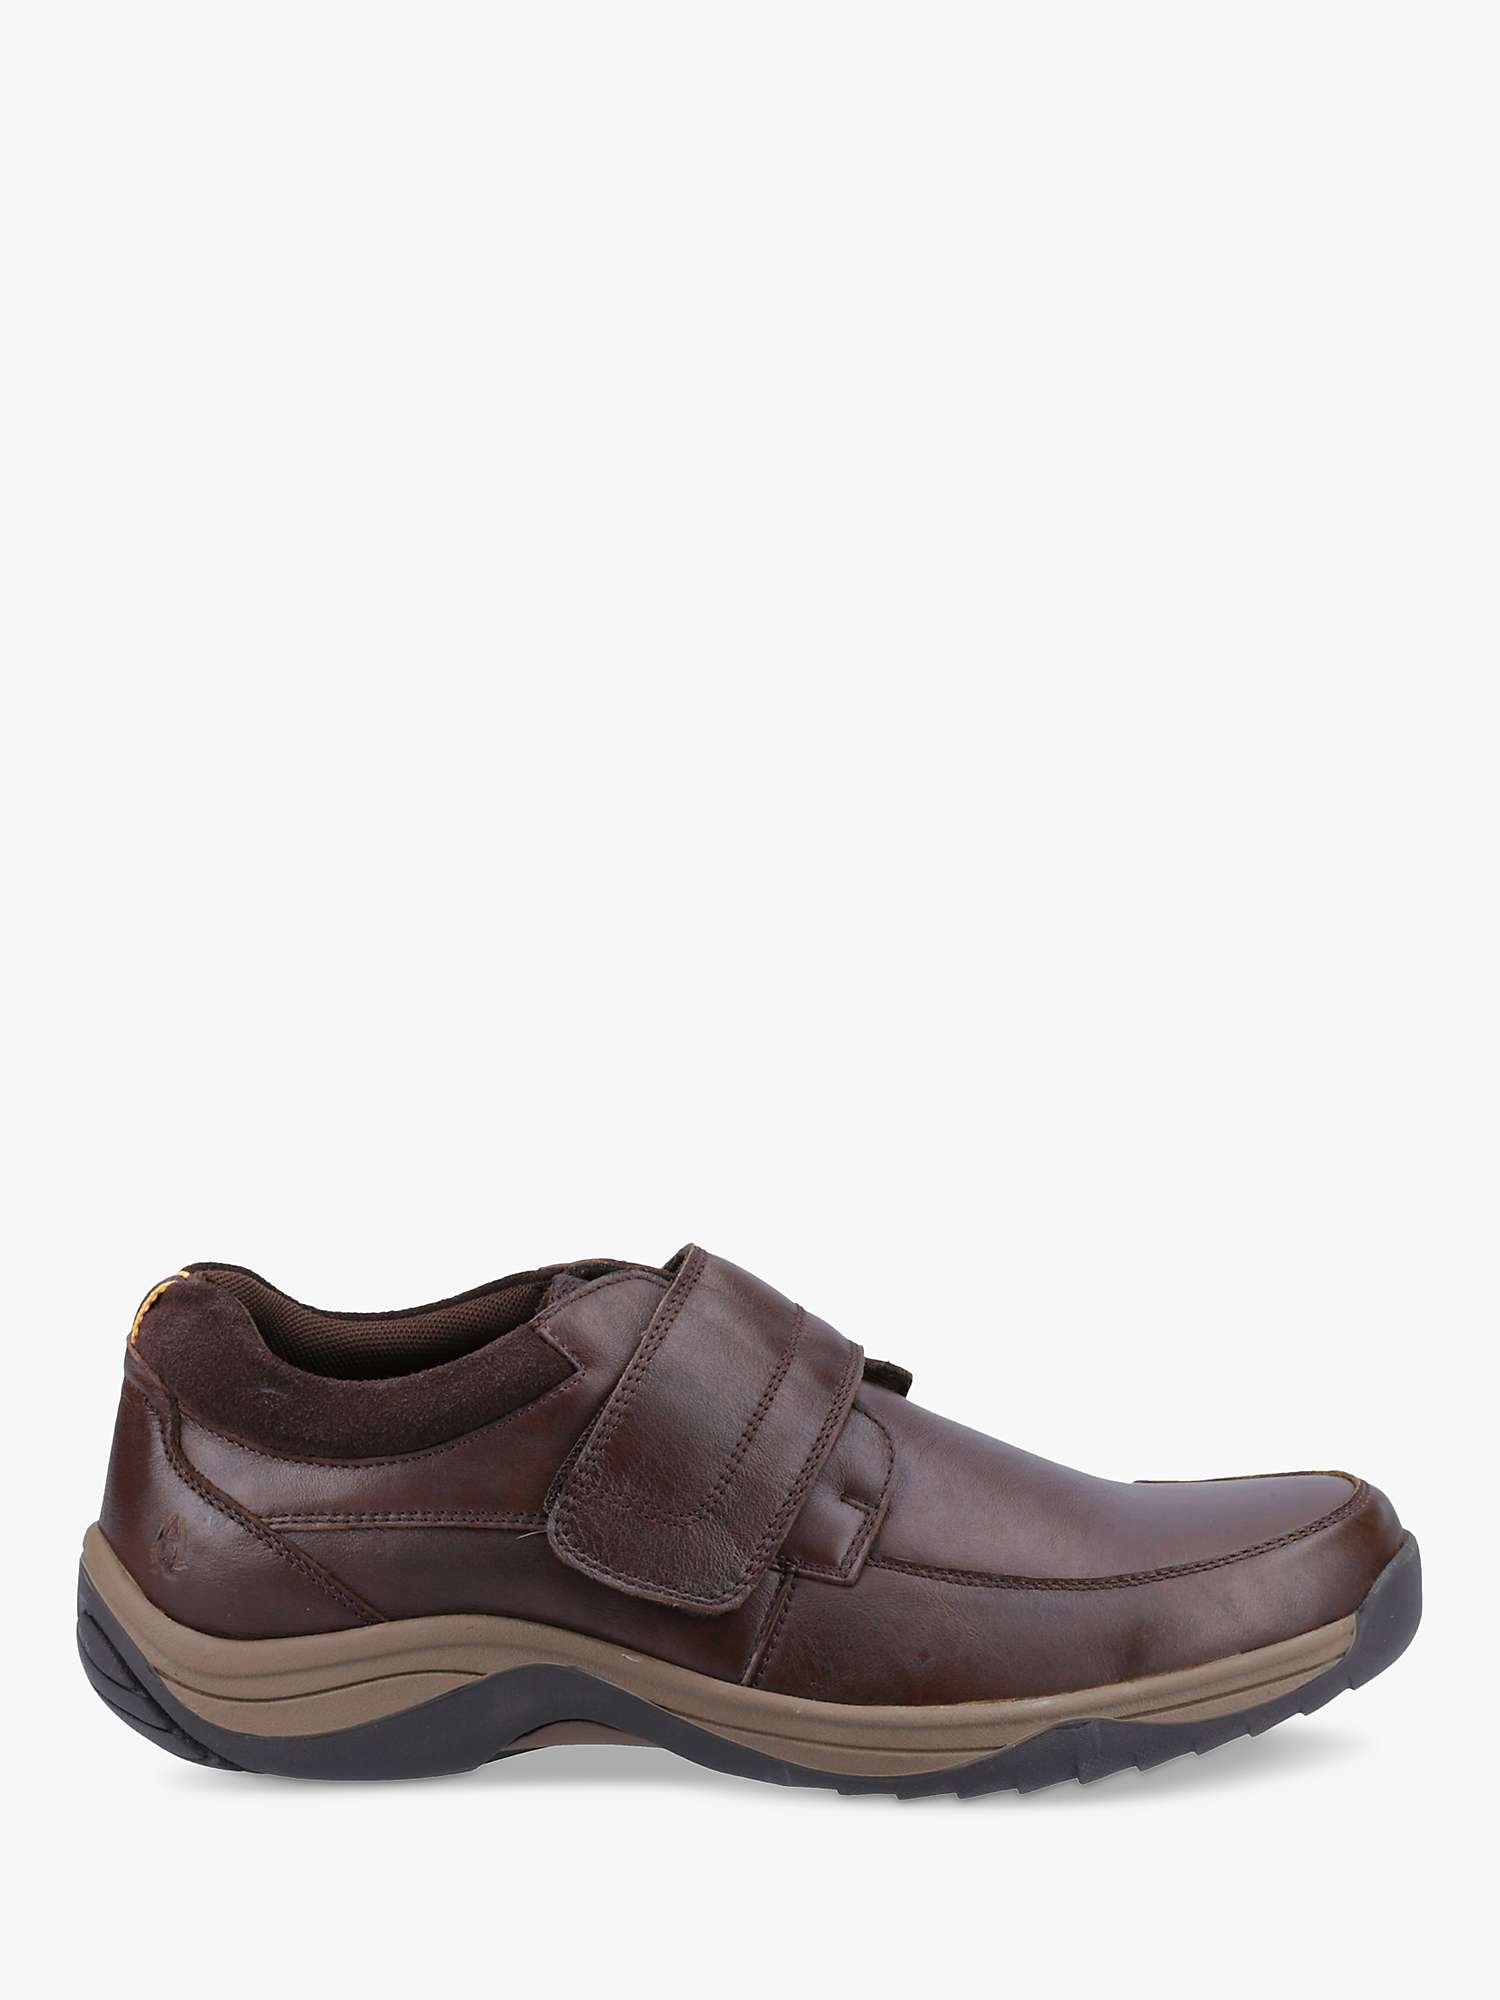 Buy Hush Puppies Douglas Leather Shoes Online at johnlewis.com